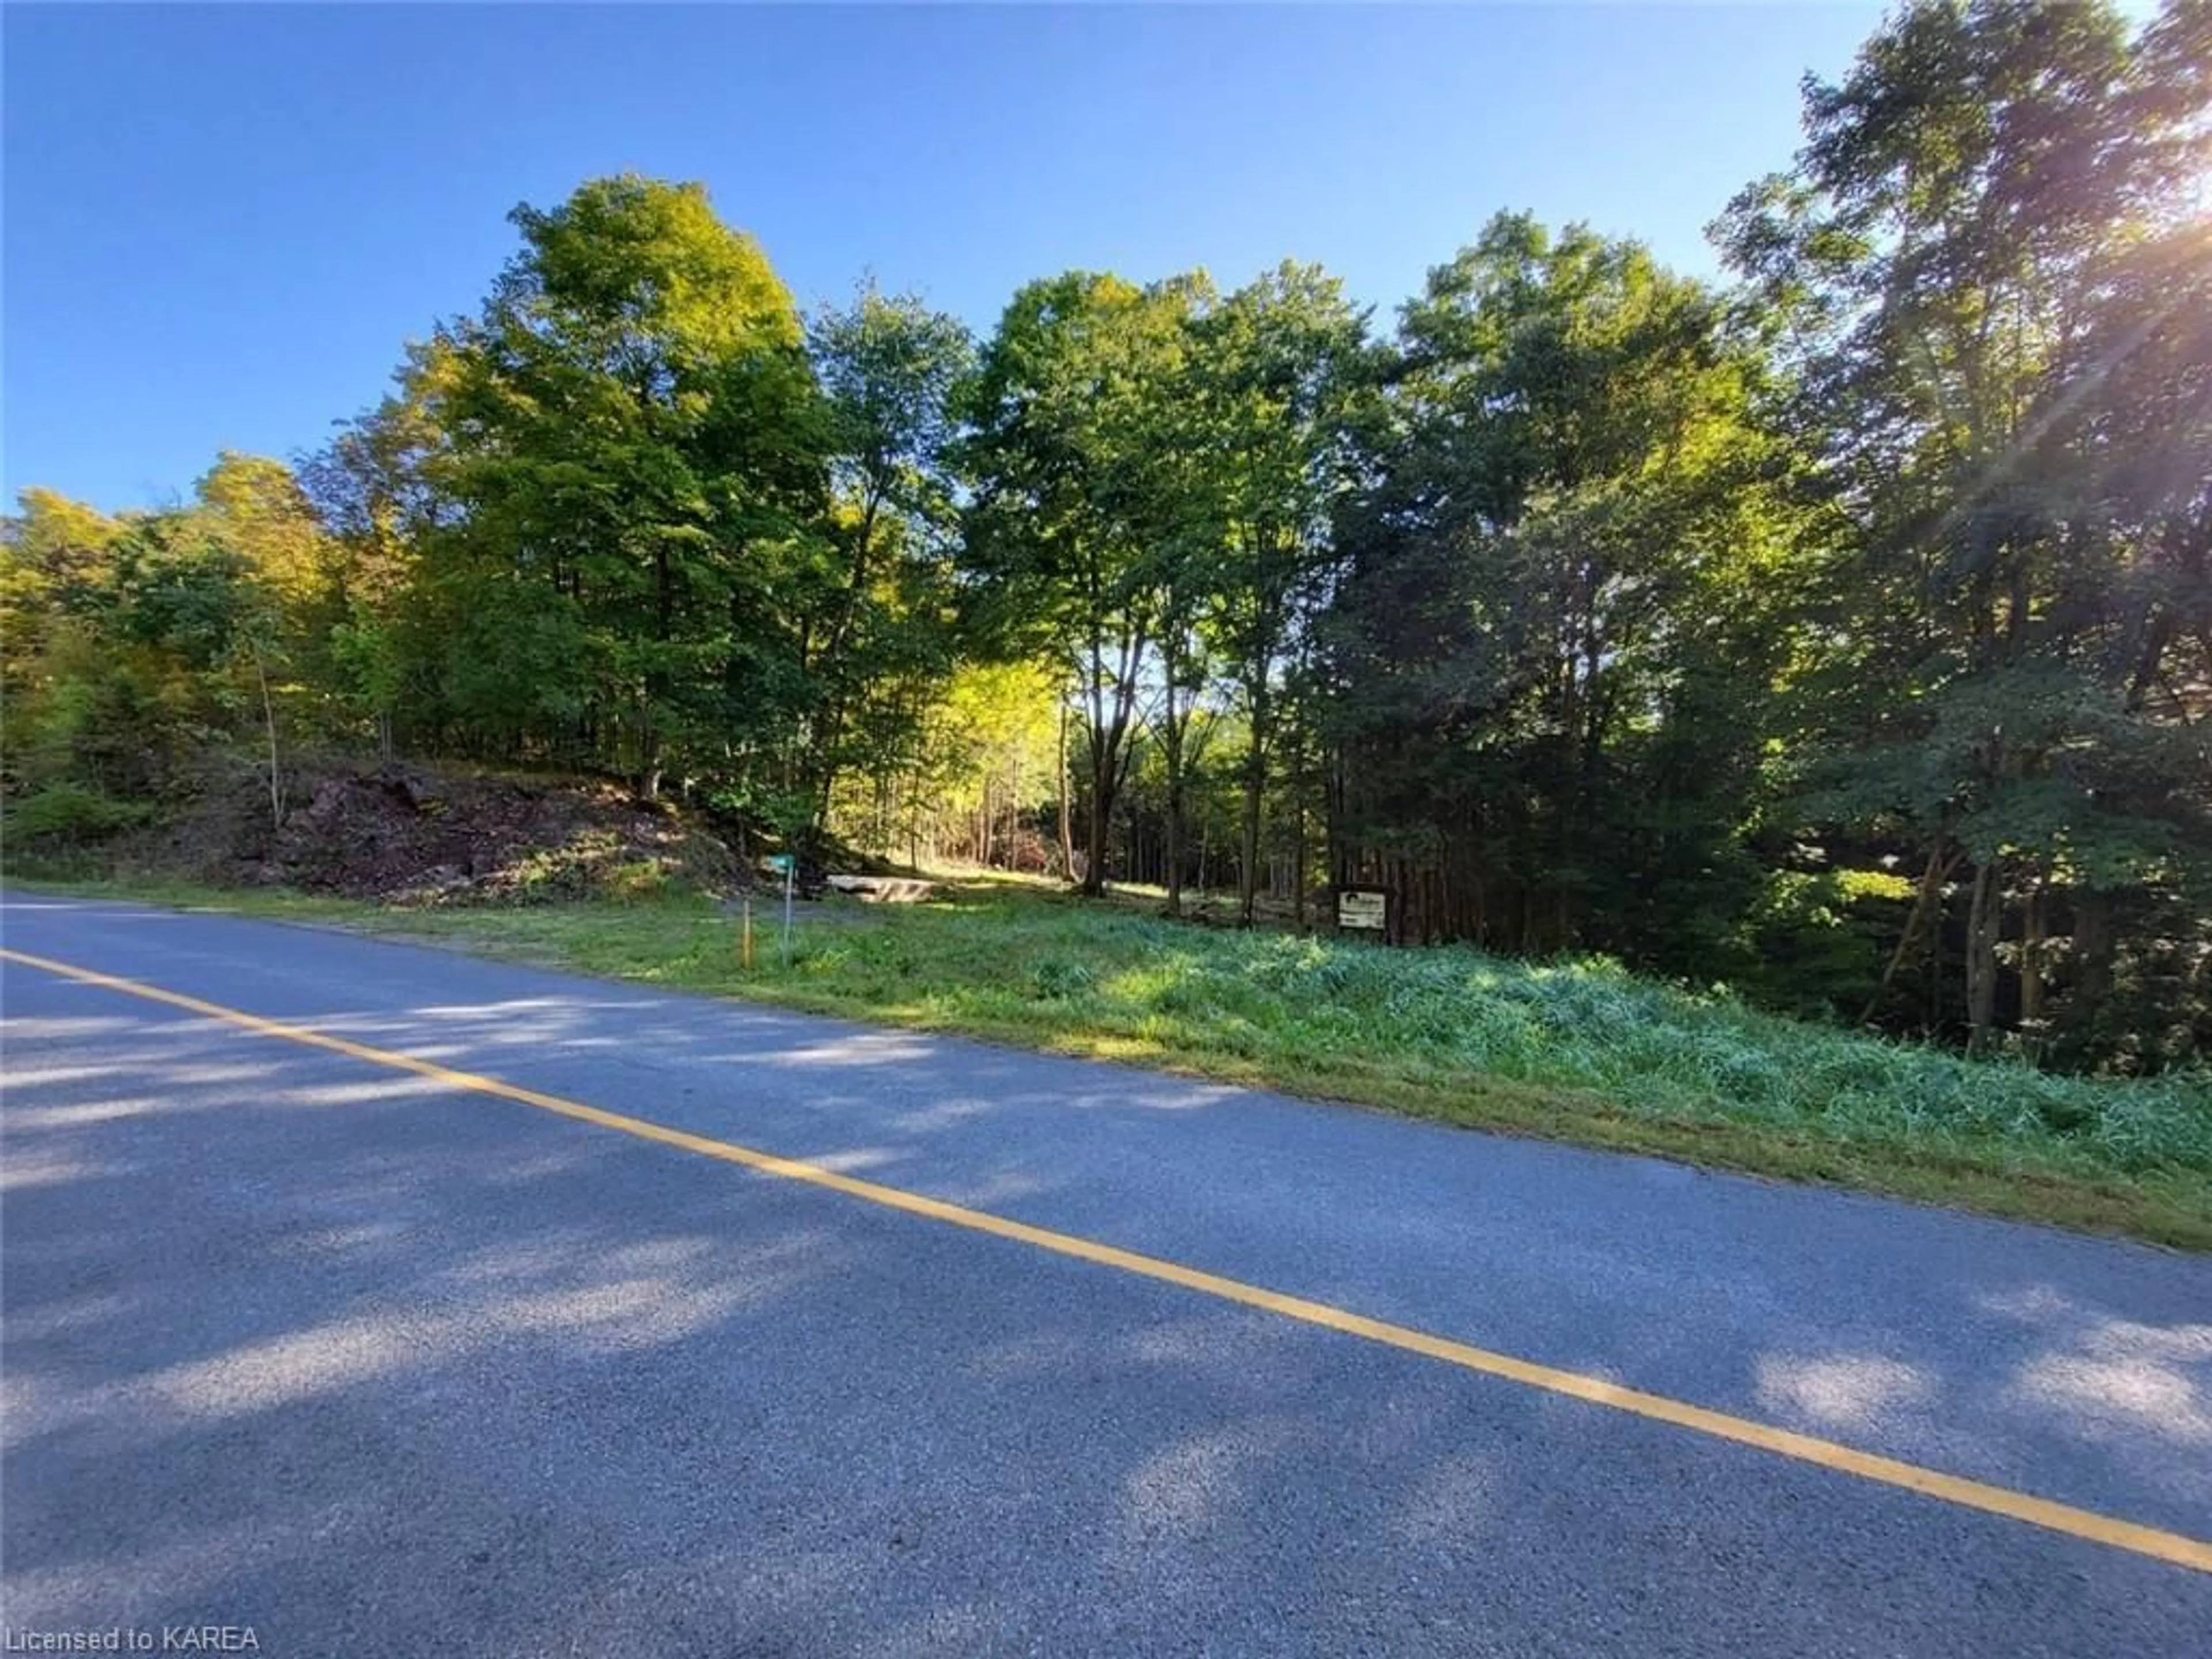 Street view for 3344 Holleford Rd, Hartington Ontario K0H 1W0